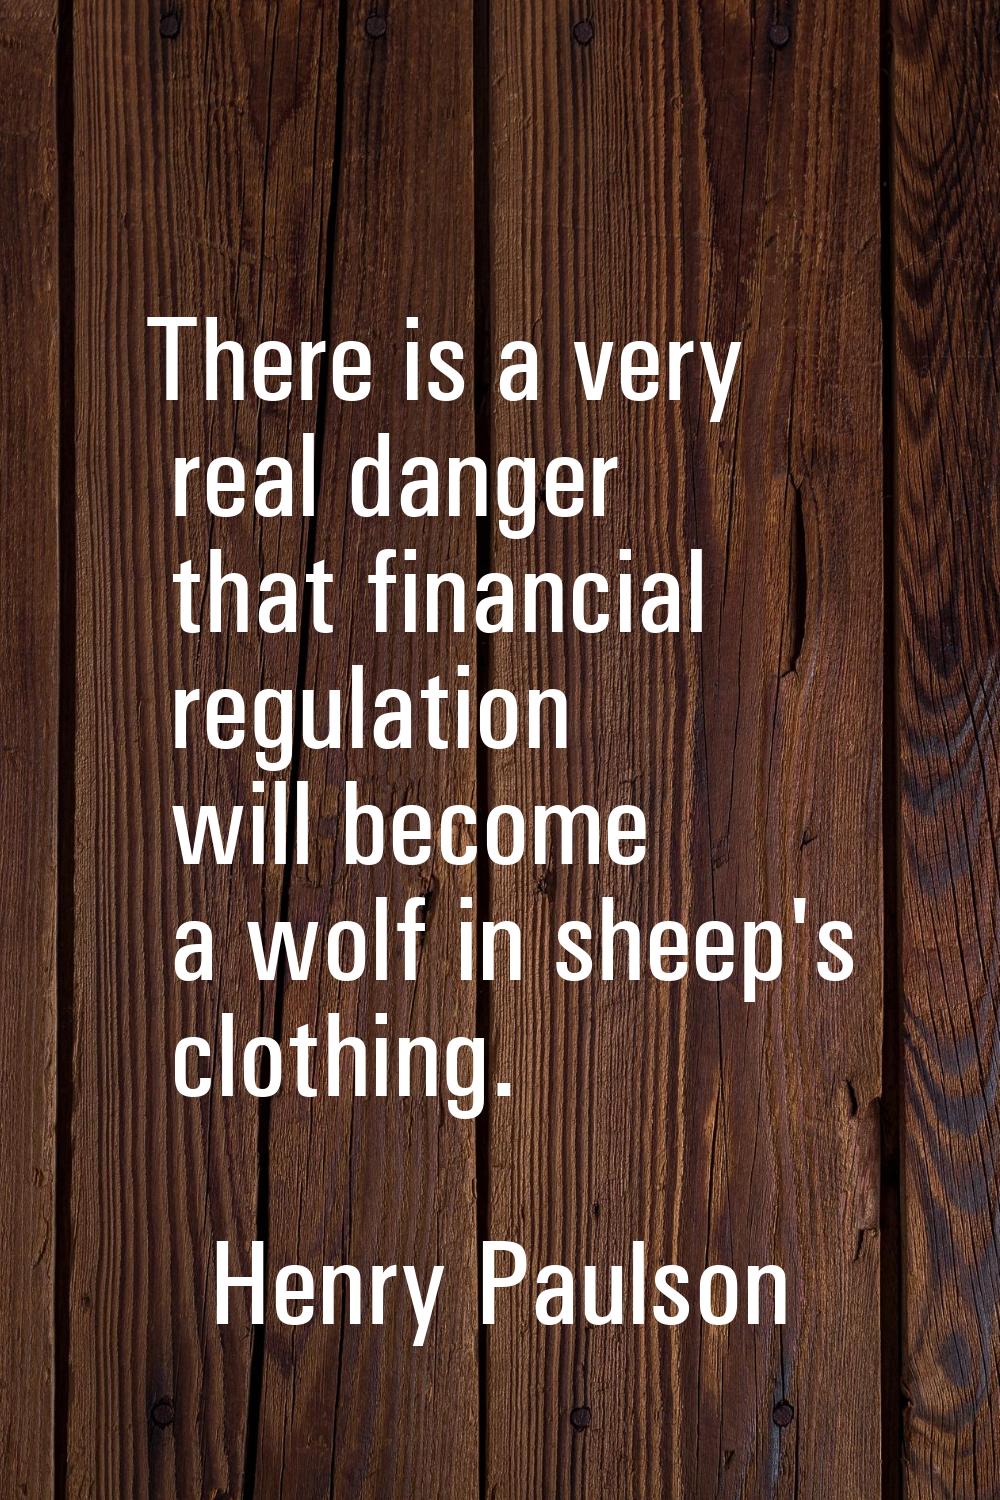 There is a very real danger that financial regulation will become a wolf in sheep's clothing.